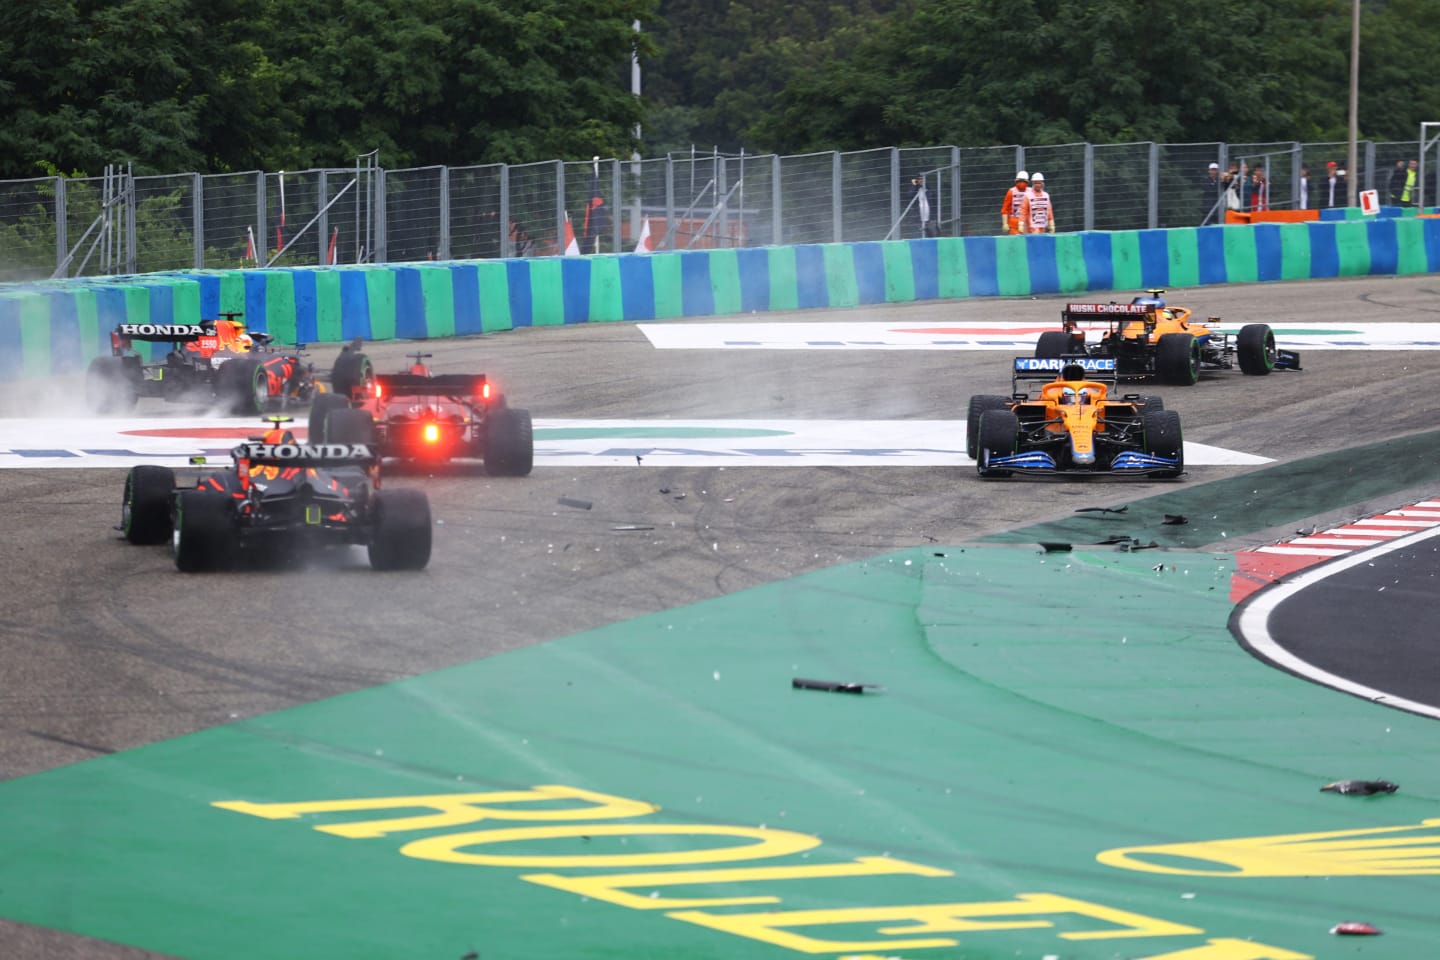 BUDAPEST, HUNGARY - AUGUST 01: A general view of the crash at the start during the F1 Grand Prix of Hungary at Hungaroring on August 01, 2021 in Budapest, Hungary. (Photo by Bryn Lennon/Getty Images)